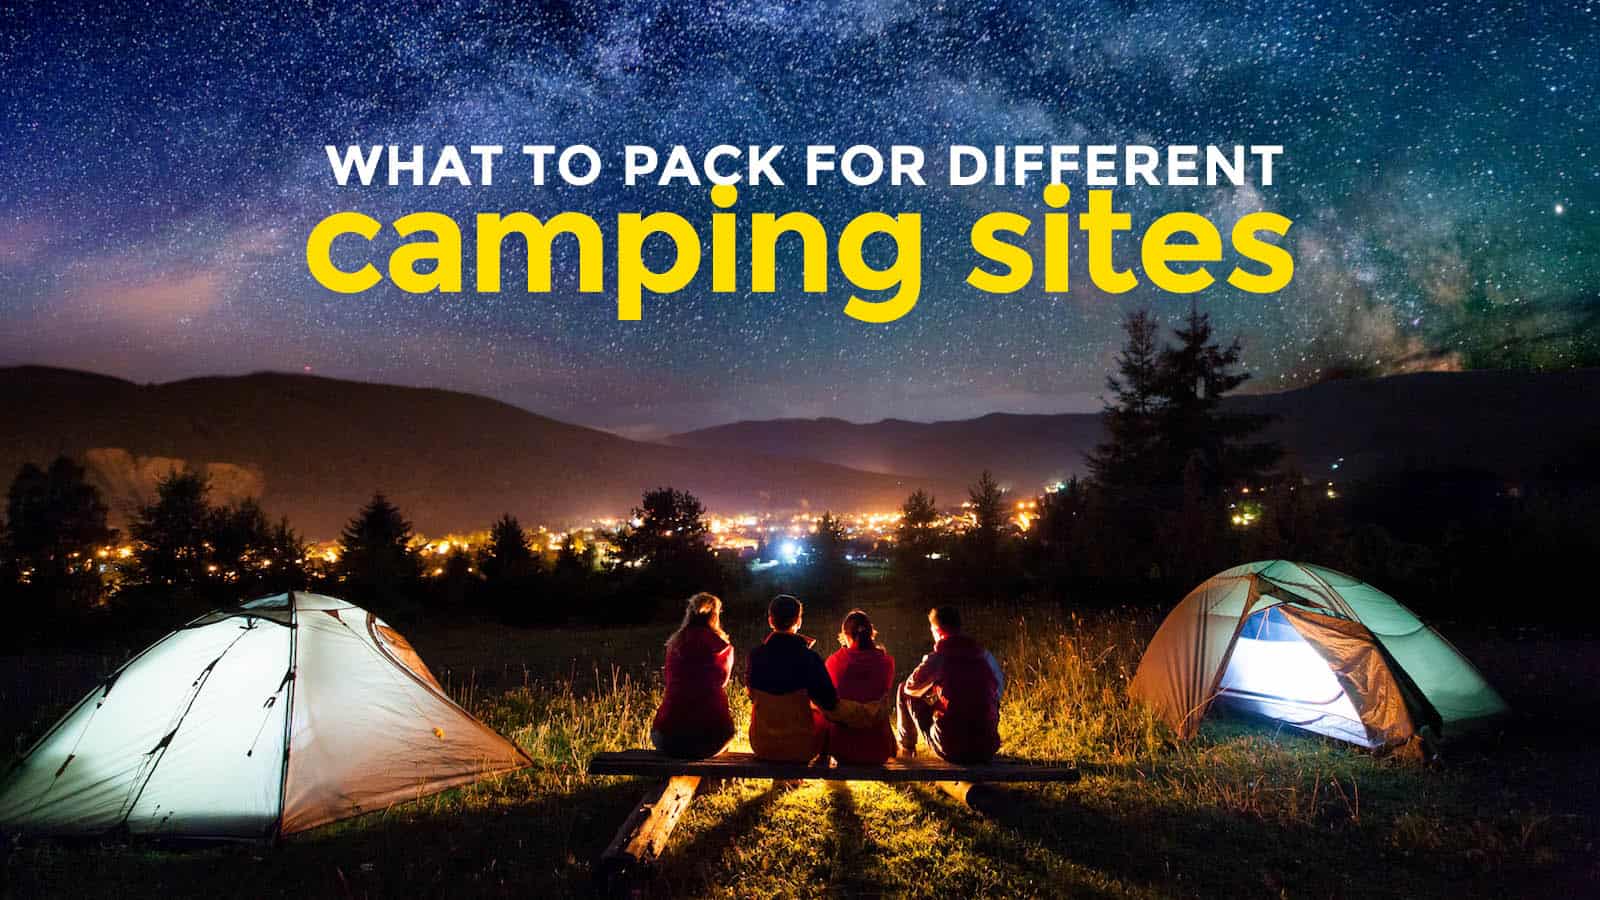 How To Pack For Different Camping Sites